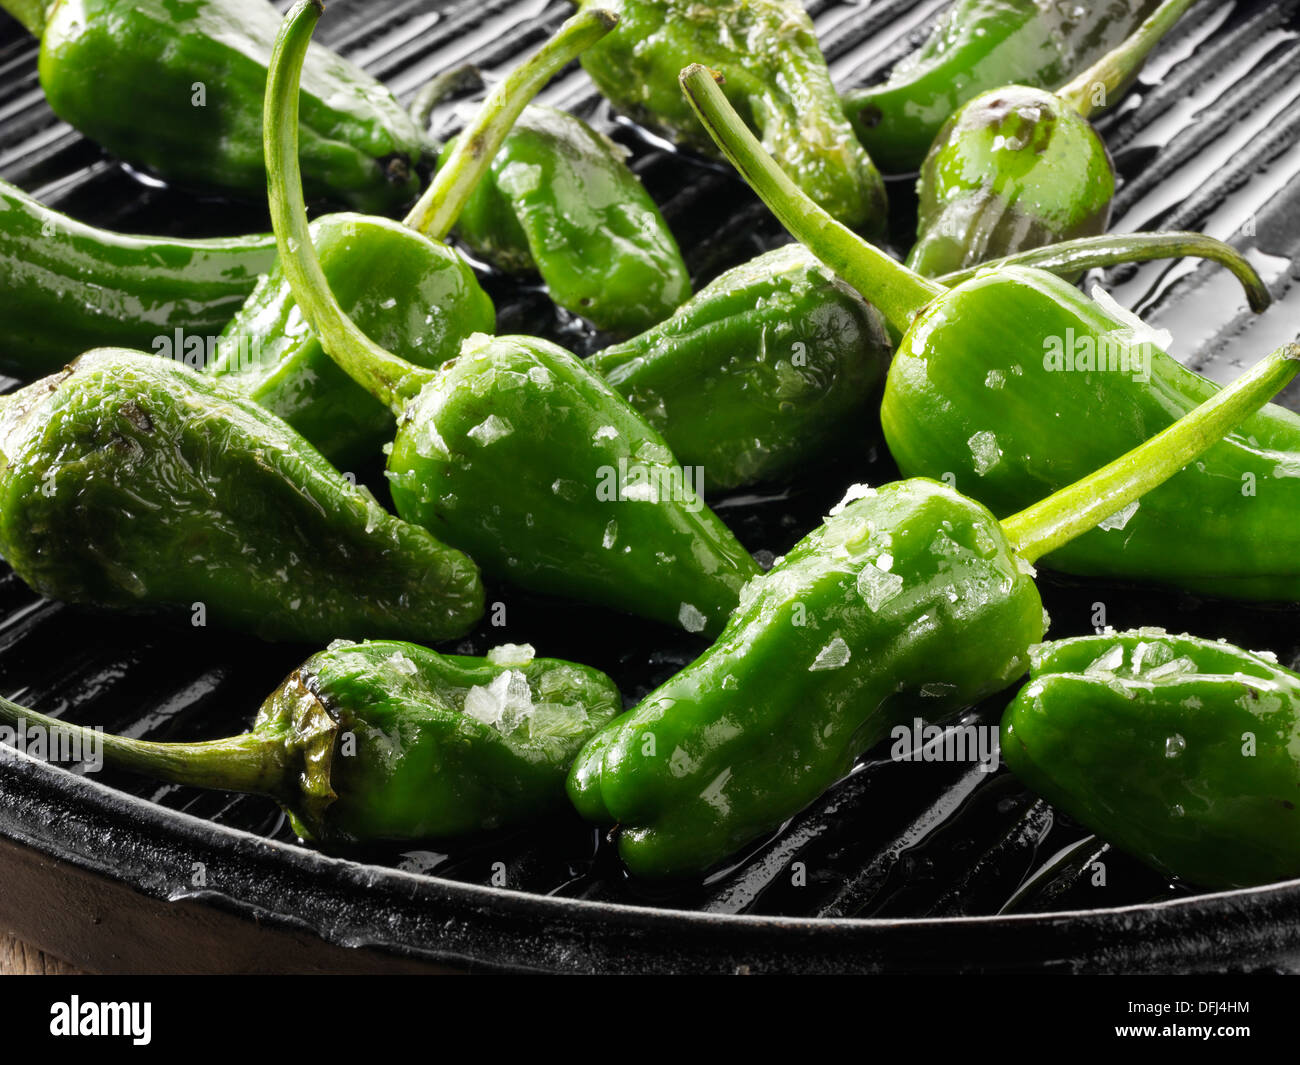 Cooked grilled patron peppers, or hebron peppers, on a black griddle, close up food photo still life Stock Photo